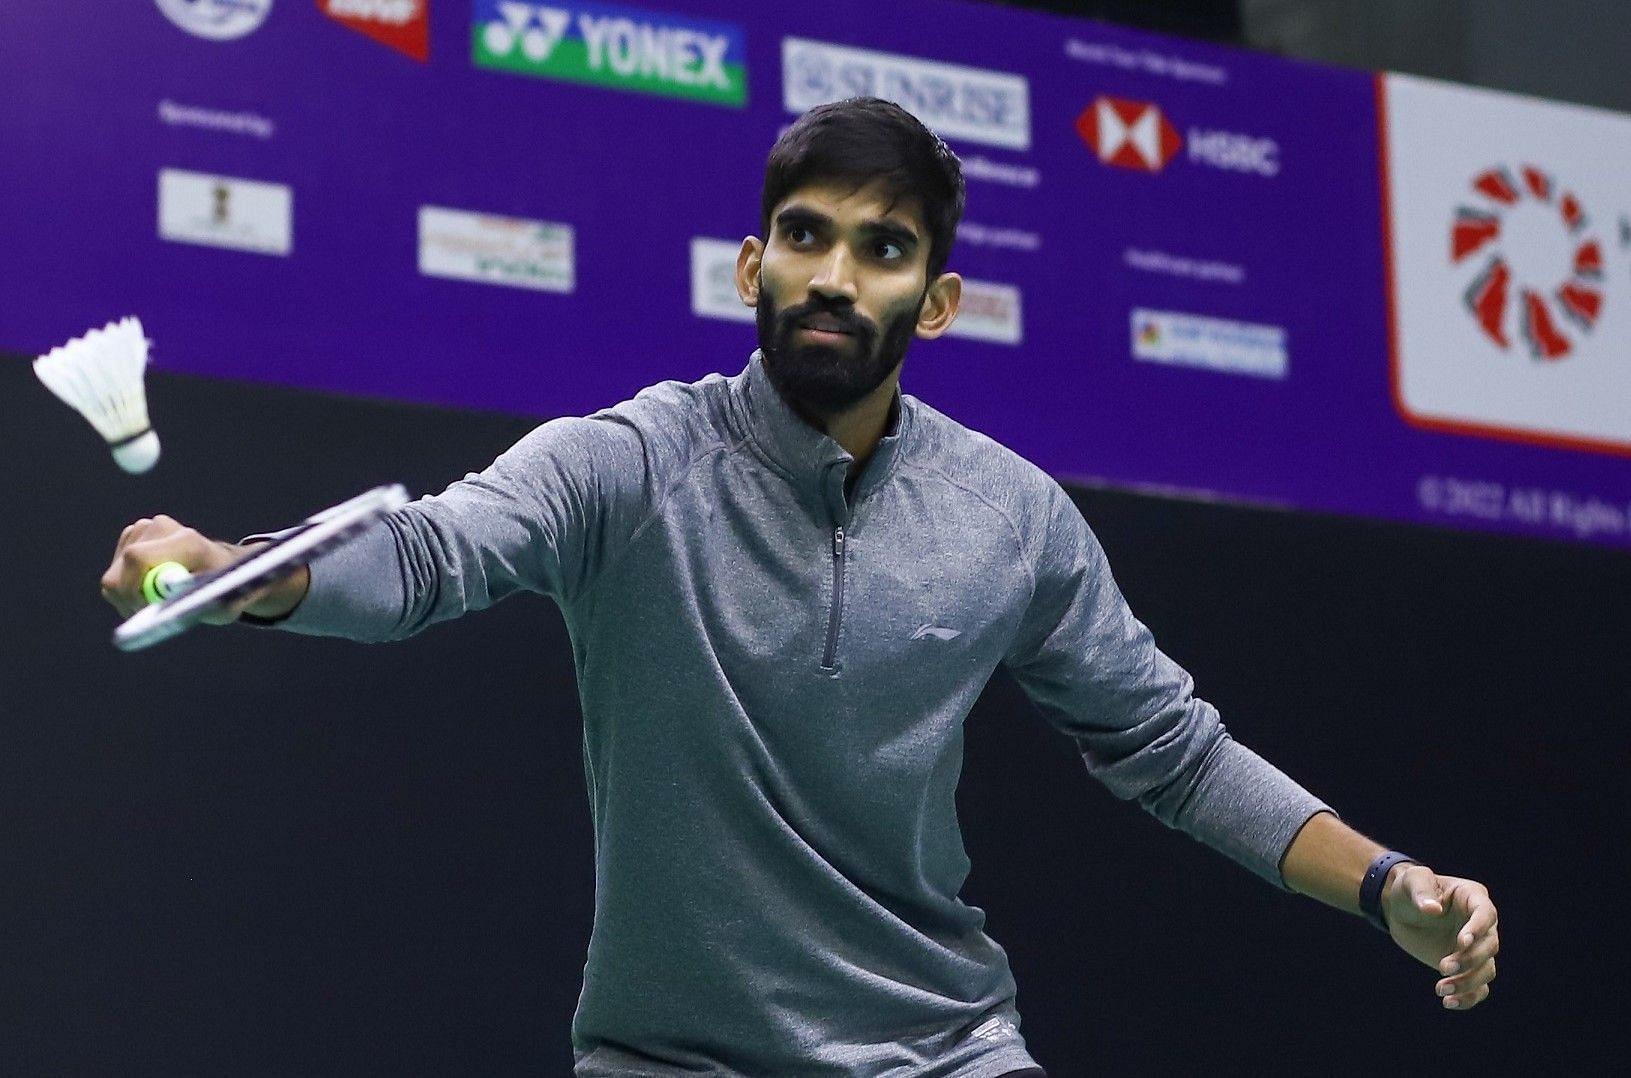 Seventh seed Kidambi Srikanth beat Christo Popov of France 13-21, 25-23, 21-11 in the Swiss Open second round match. (Pic credit: BAI)